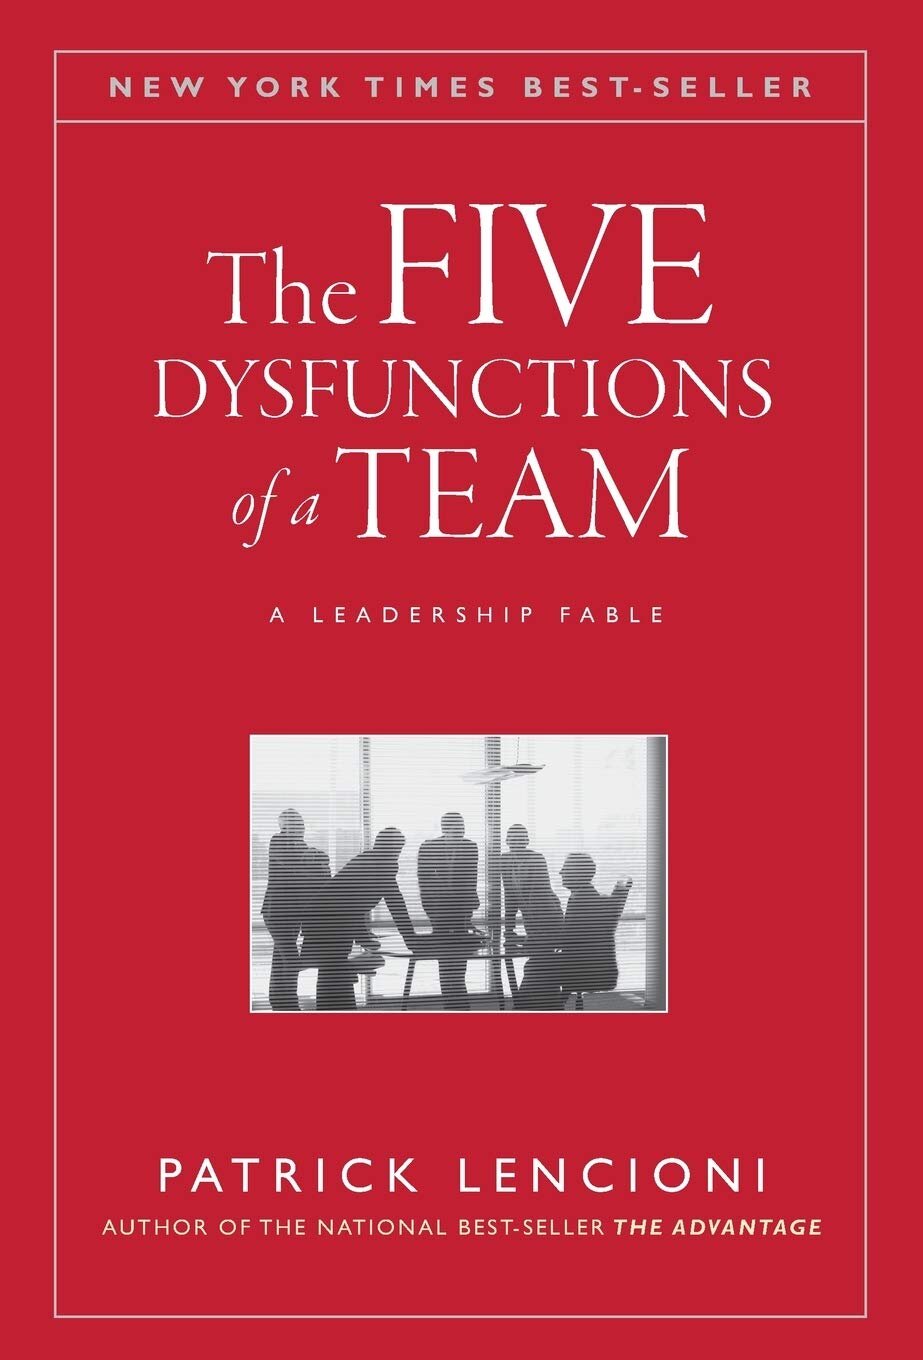 the five dysfunctions of a team_book cover.jpg